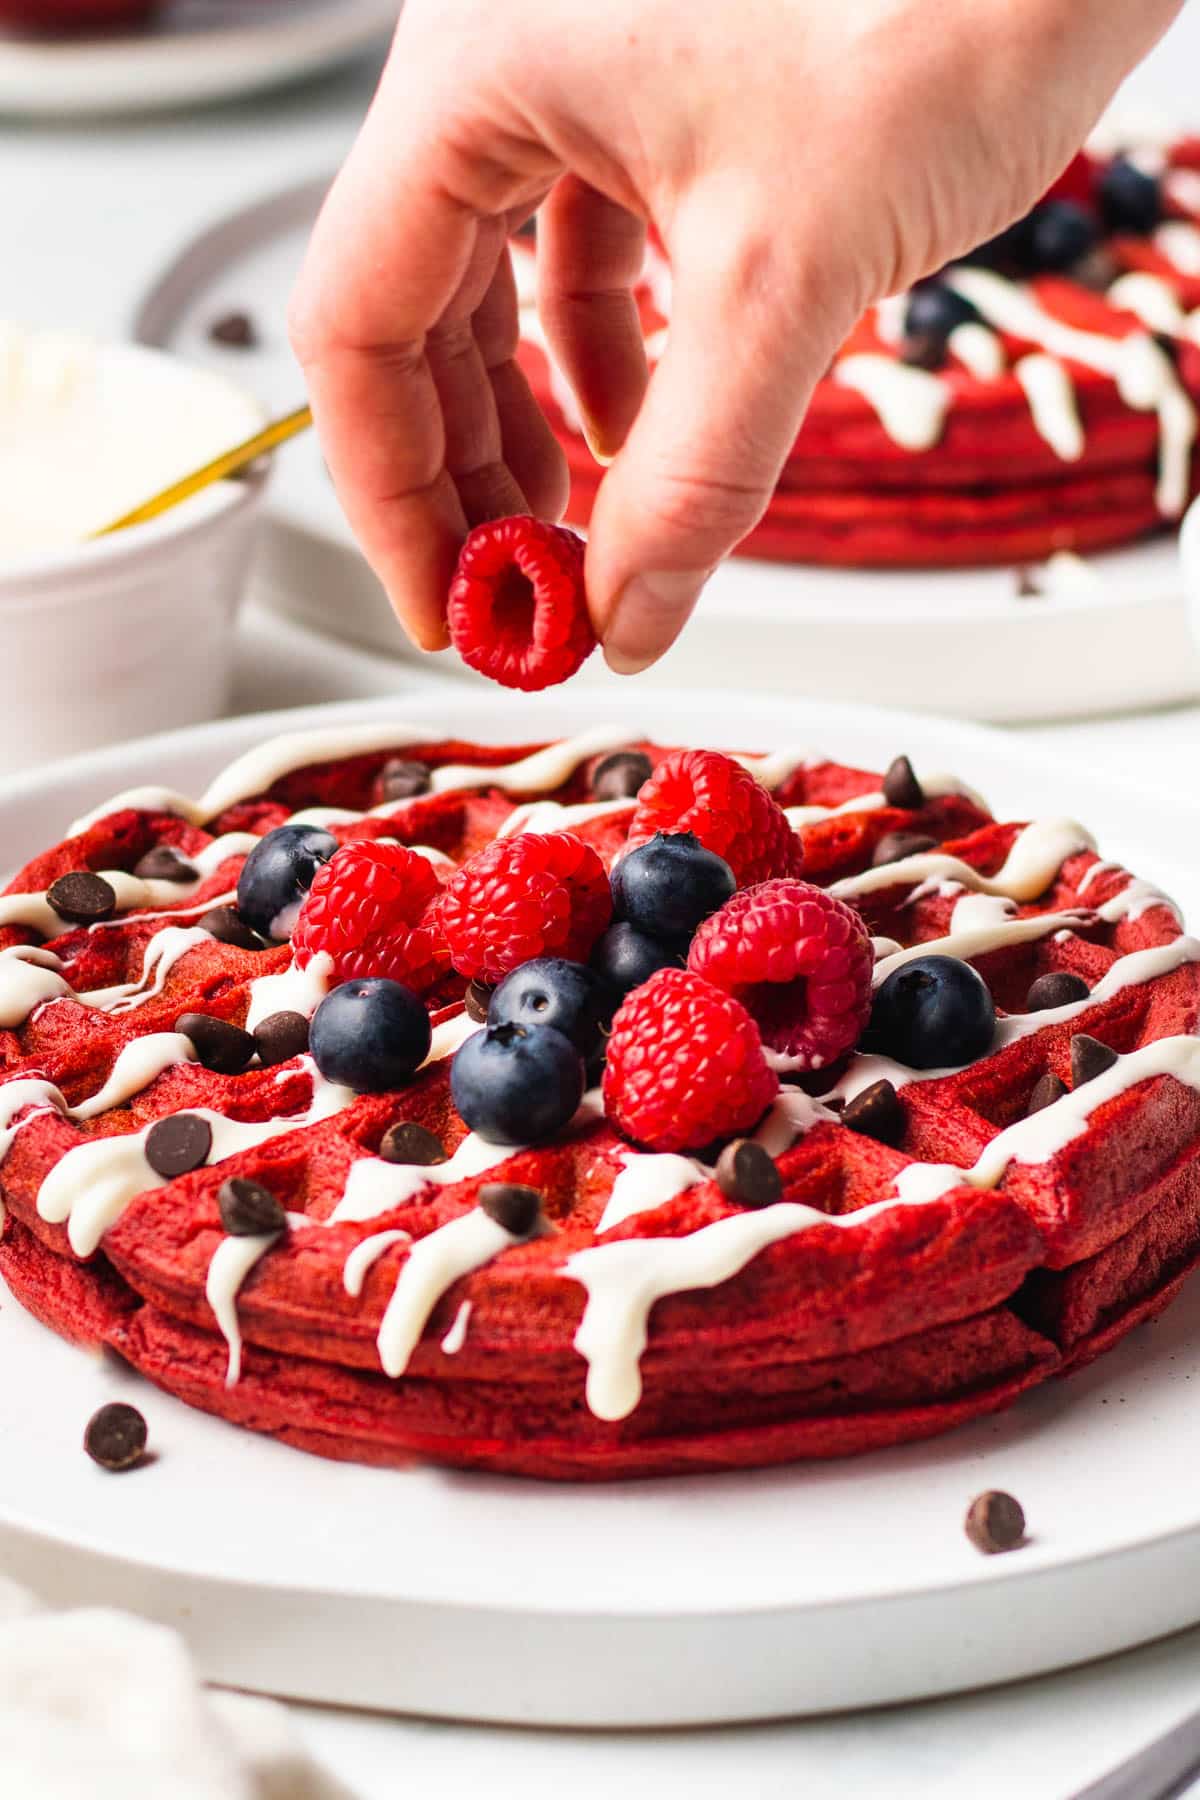 A hand placing berries on top of red velvet waffles.